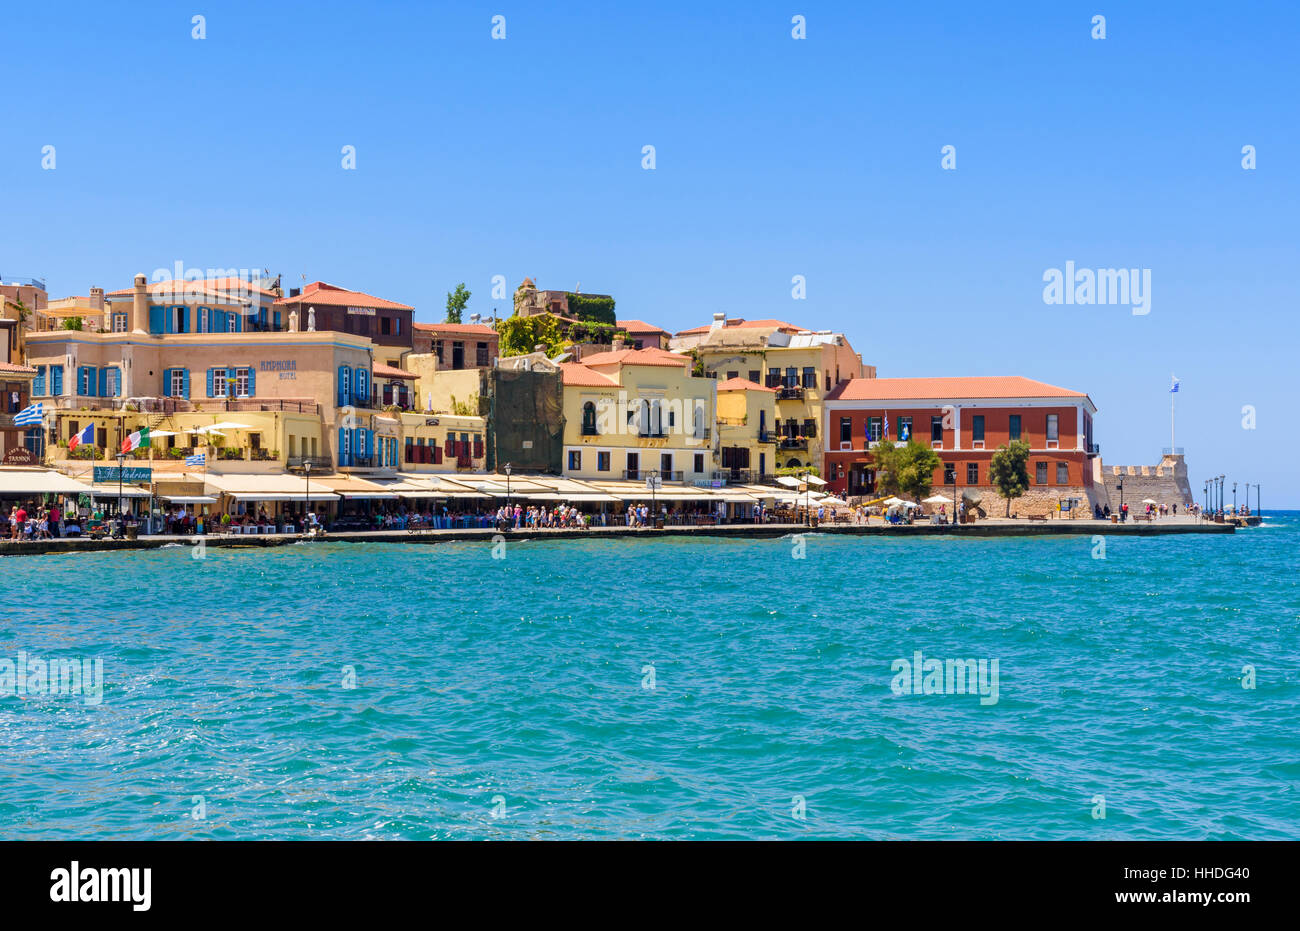 Buildings along the waterfront promenade around the old outer Venetian harbour of Chania, Crete, Greece Stock Photo